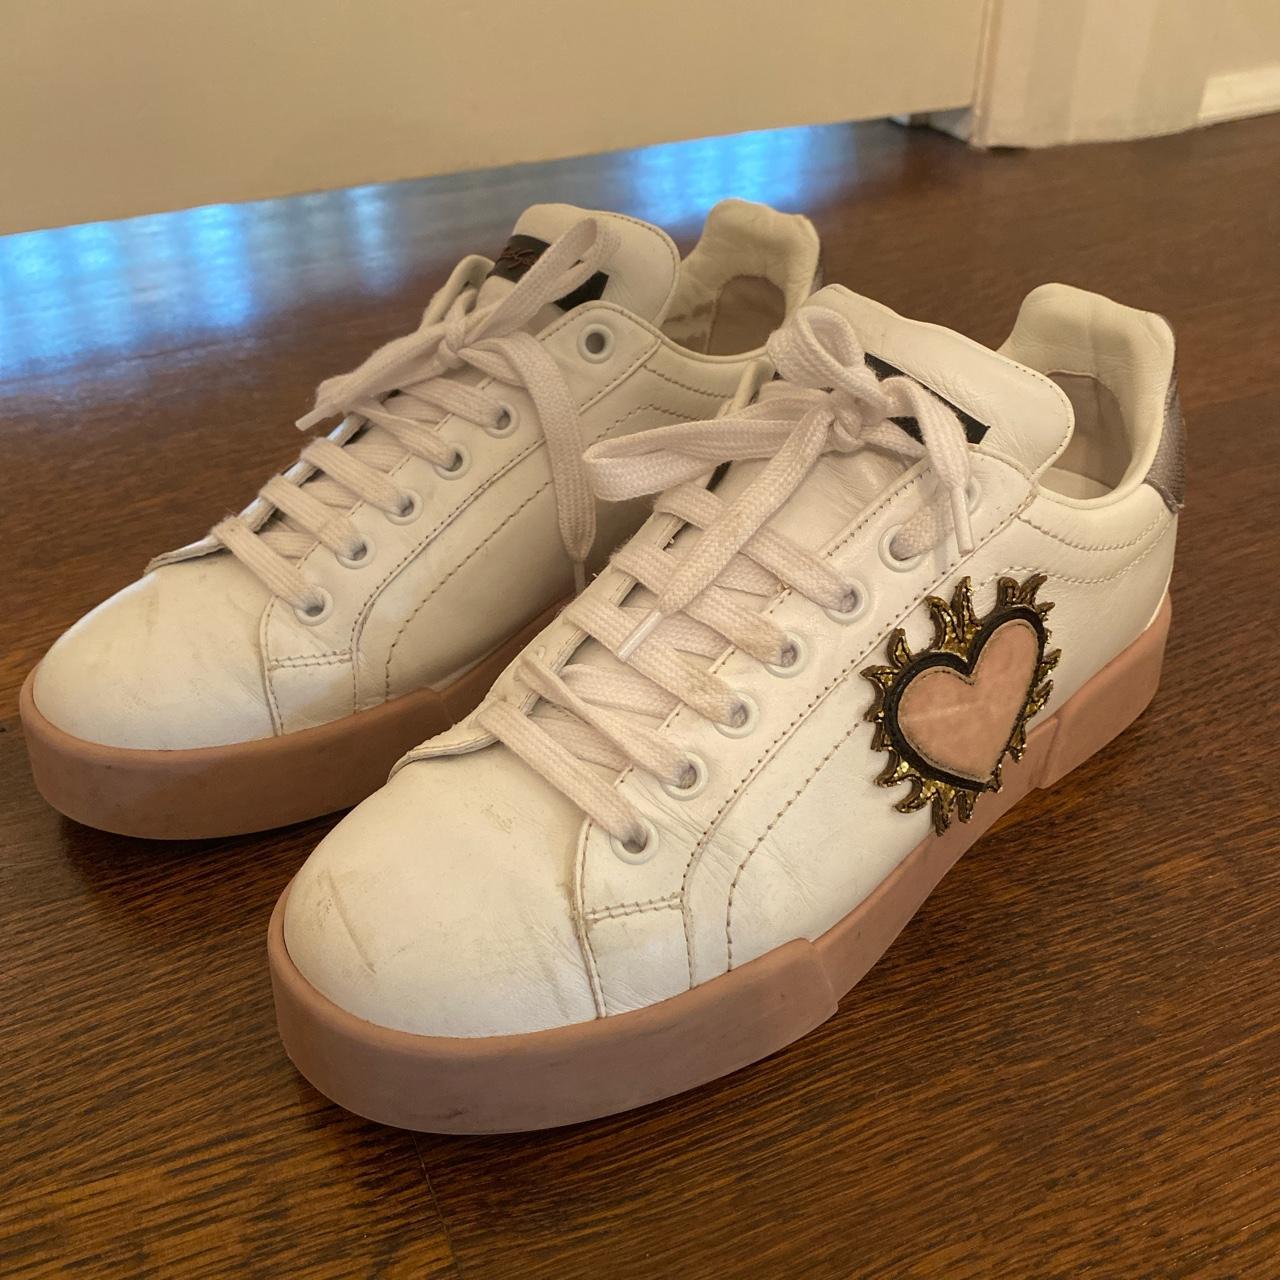 Dolce & Gabbana Women's White and Pink Trainers